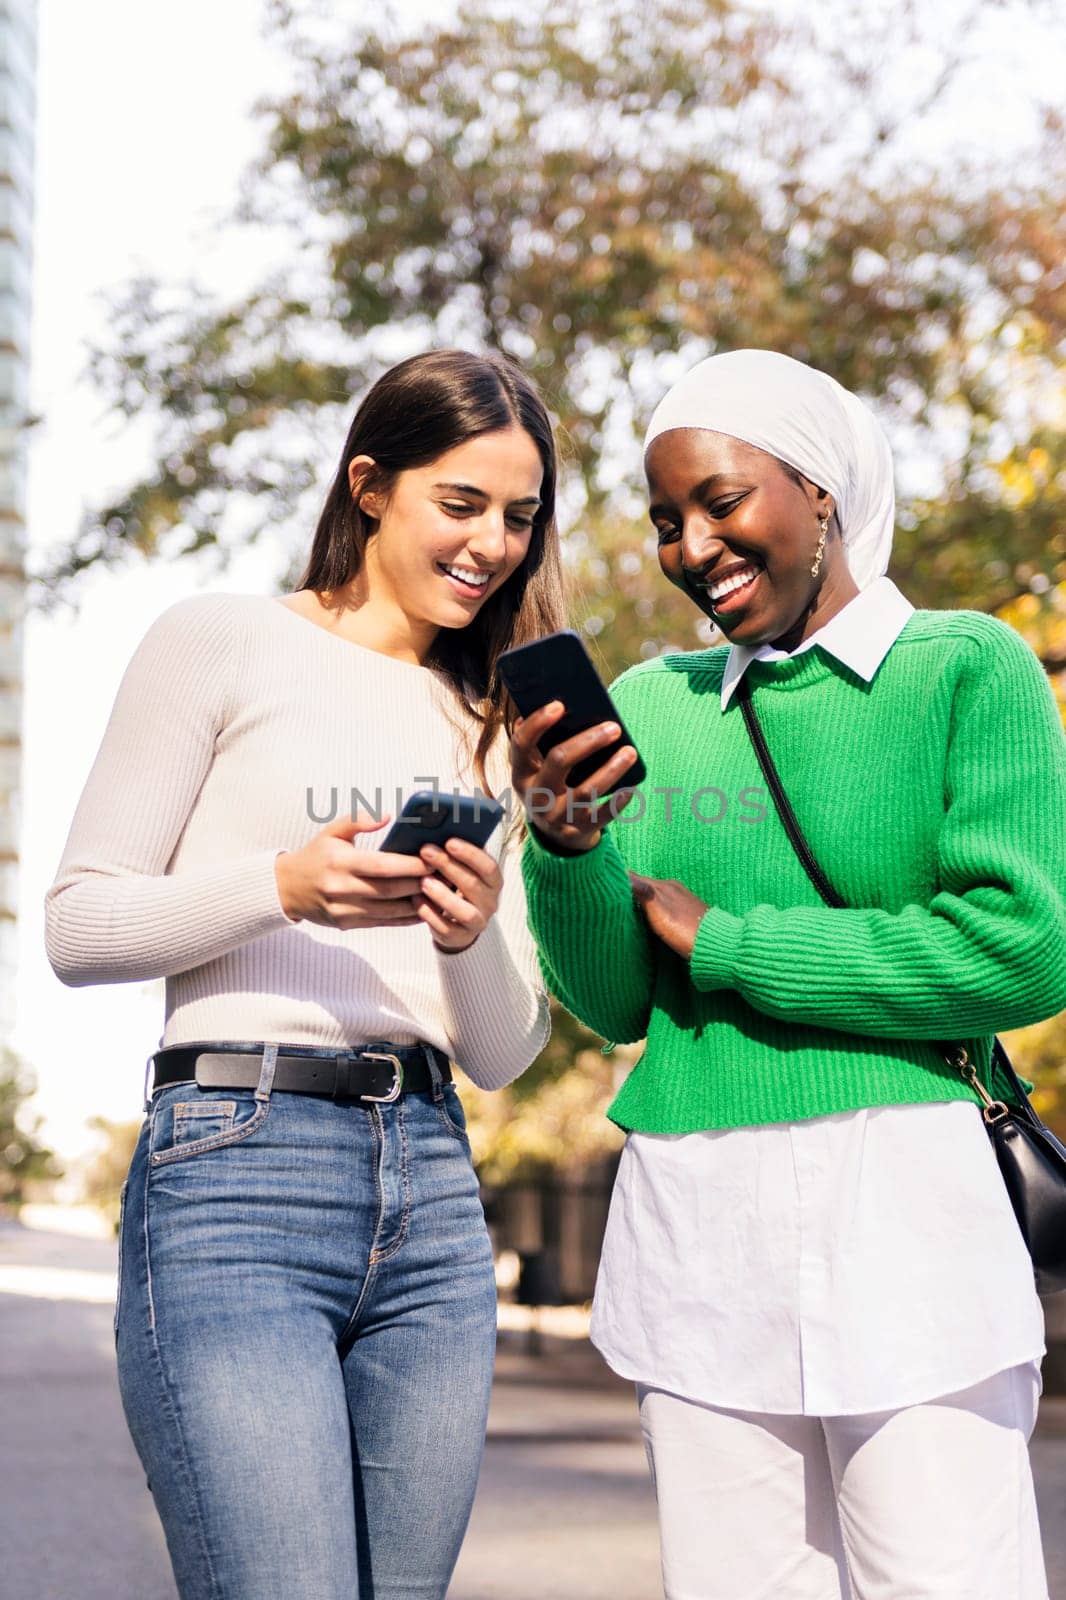 two young women smiling happy looking their mobile phones, concept of friendship and technology